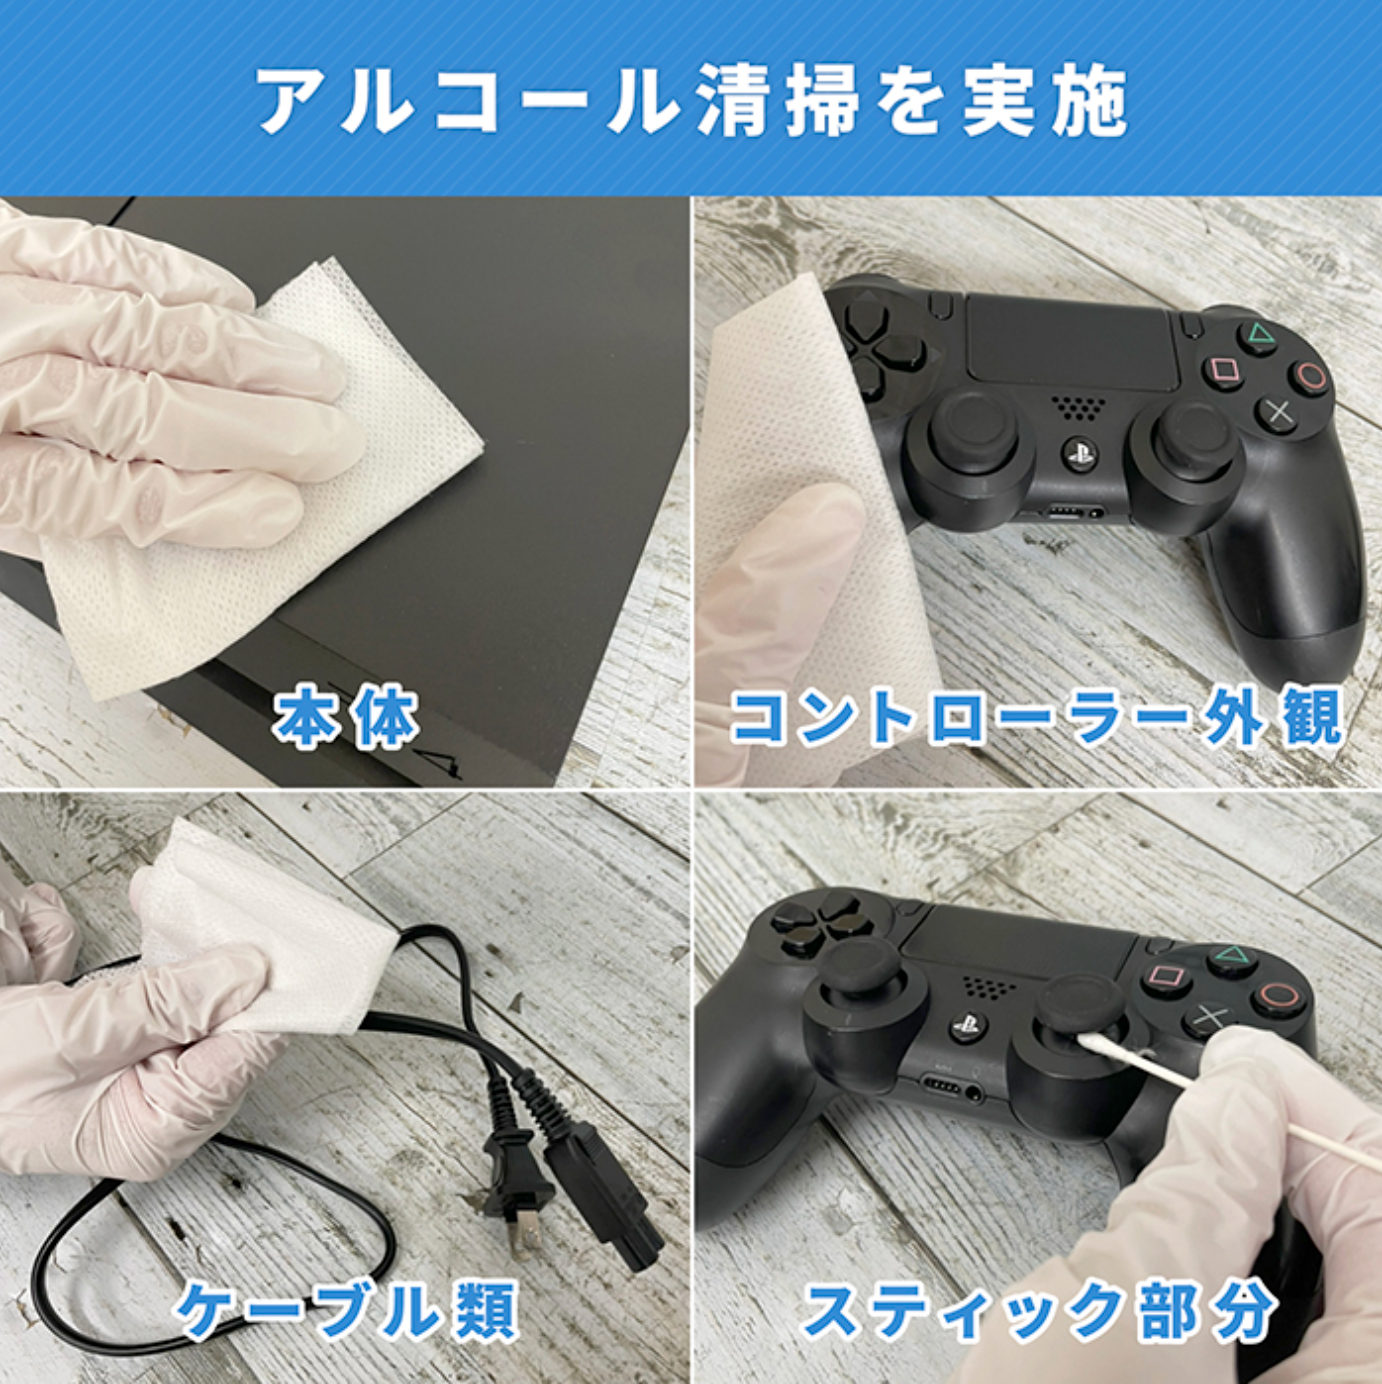 PlayStation®4 500GB PS4 (コントローラー、ケーブル付き)